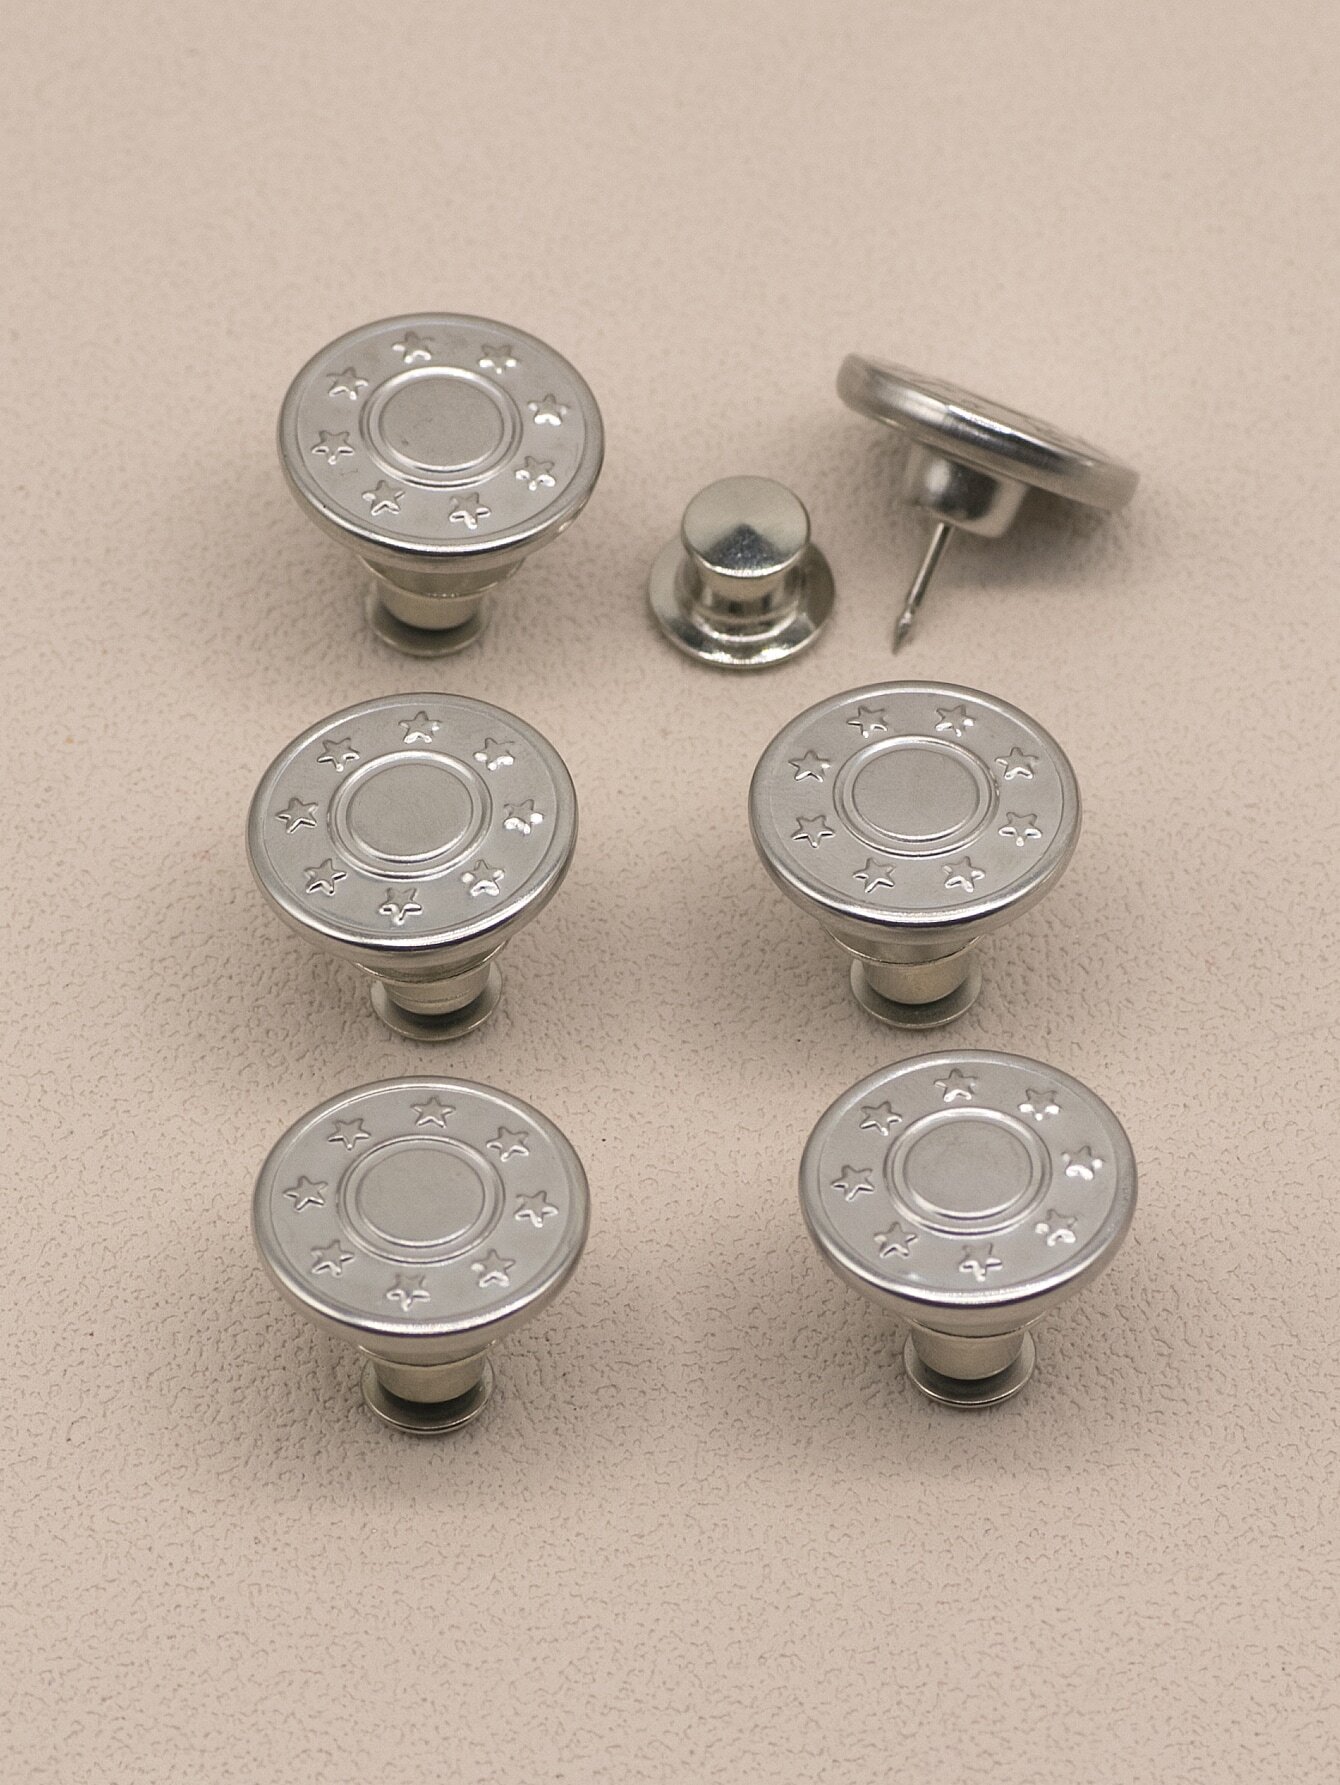 6 pcs Jeans Buttons Replacement 17mm No Sewing Metal Button Repair Kit Nailless Removable Jean Buttons Replacement Combo